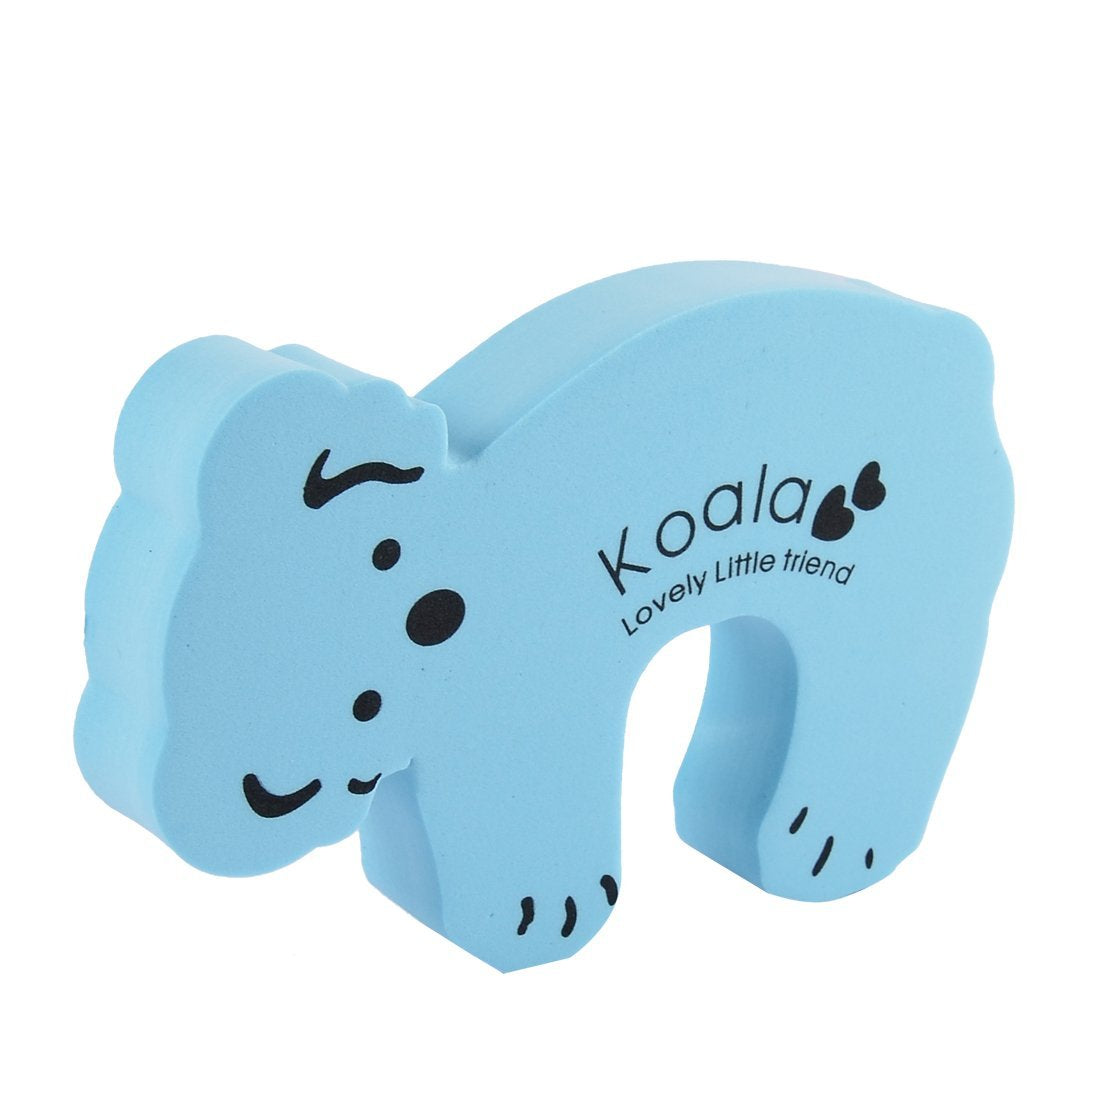 6039A  Animal Shape Door Stopper Lock Safety Guard, Kids Safety and Protection Finger Pich Door Guard, Baby Safety Cute Animal Security Door Stopper (2pc Set)